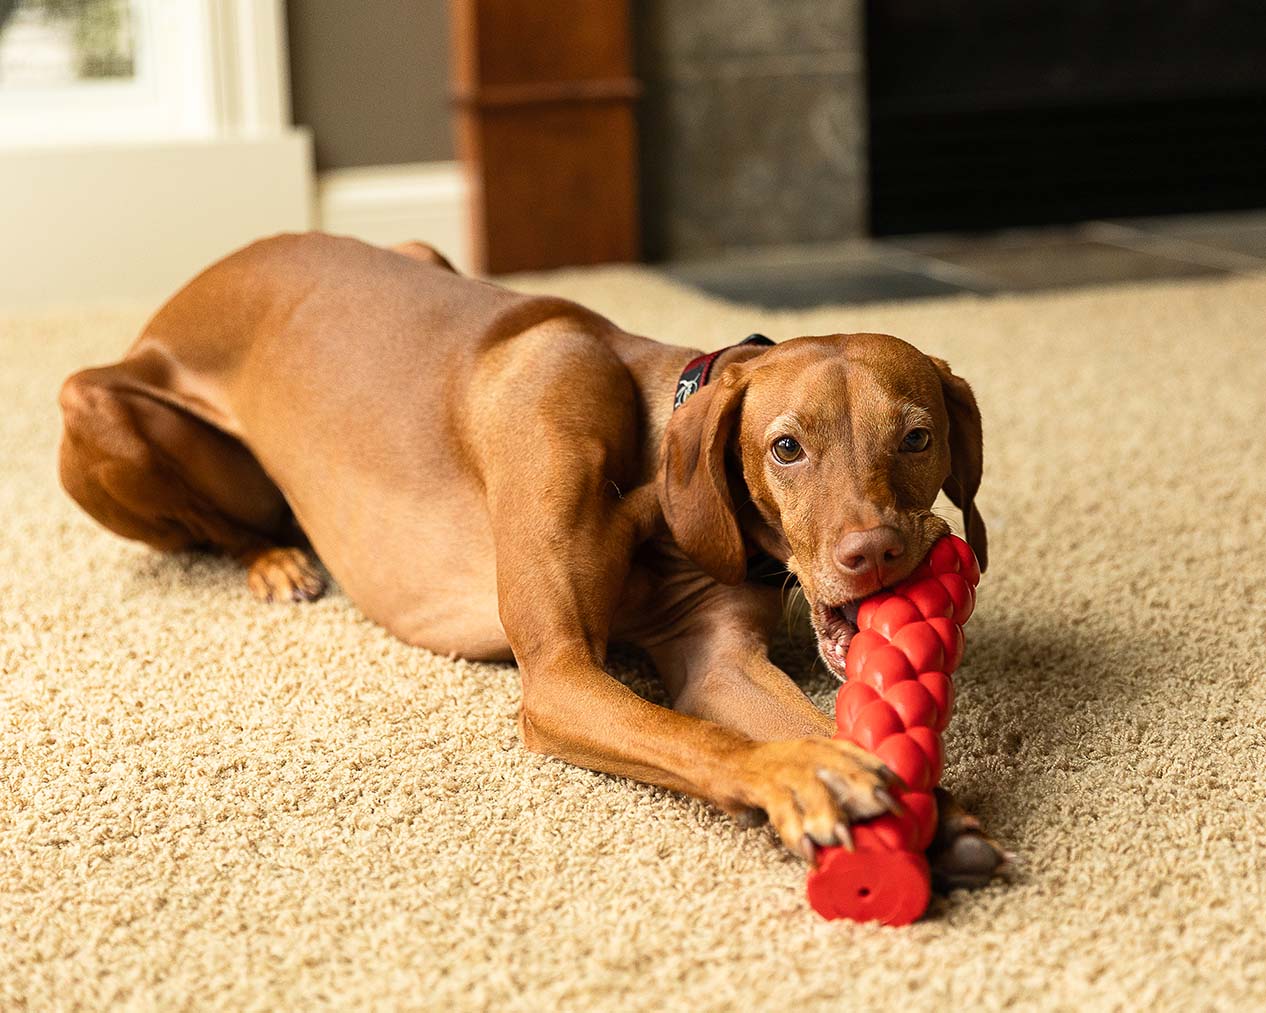 A dog chewing on a red rubber baton dog toy, which is included in subscriptions